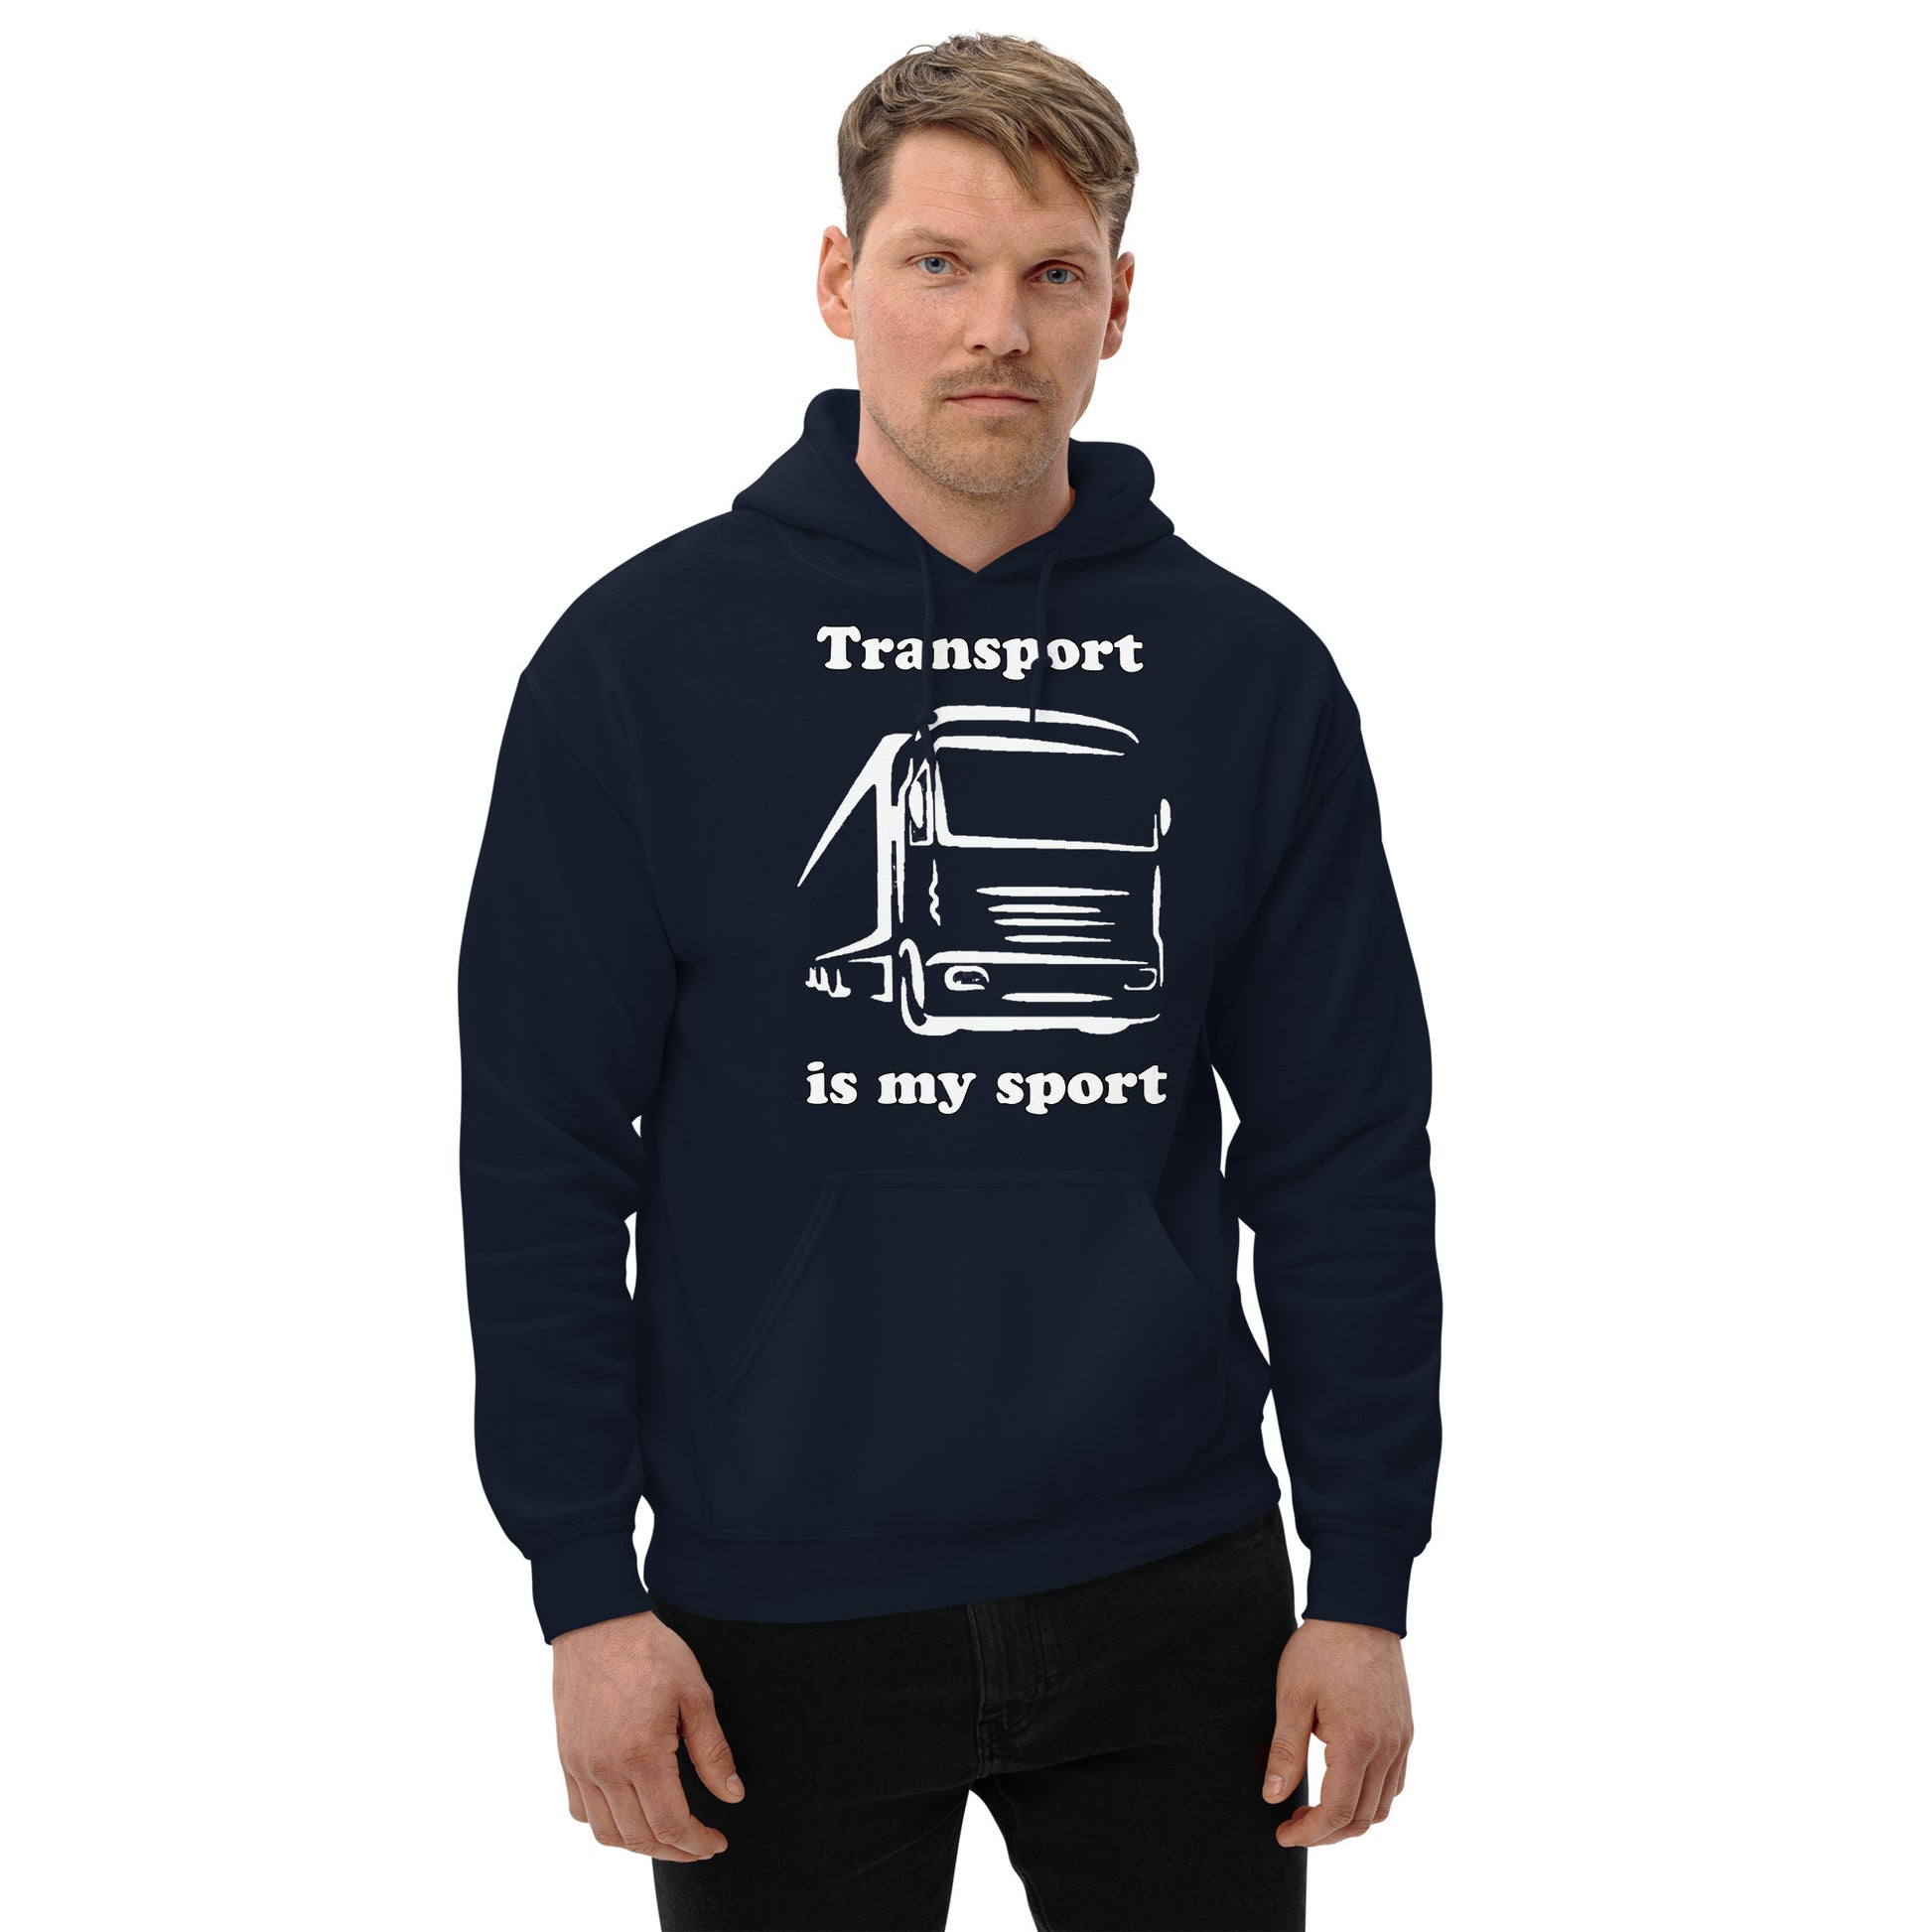 Man with navy blue hoodie with picture of truck and text "Transport is my sport"